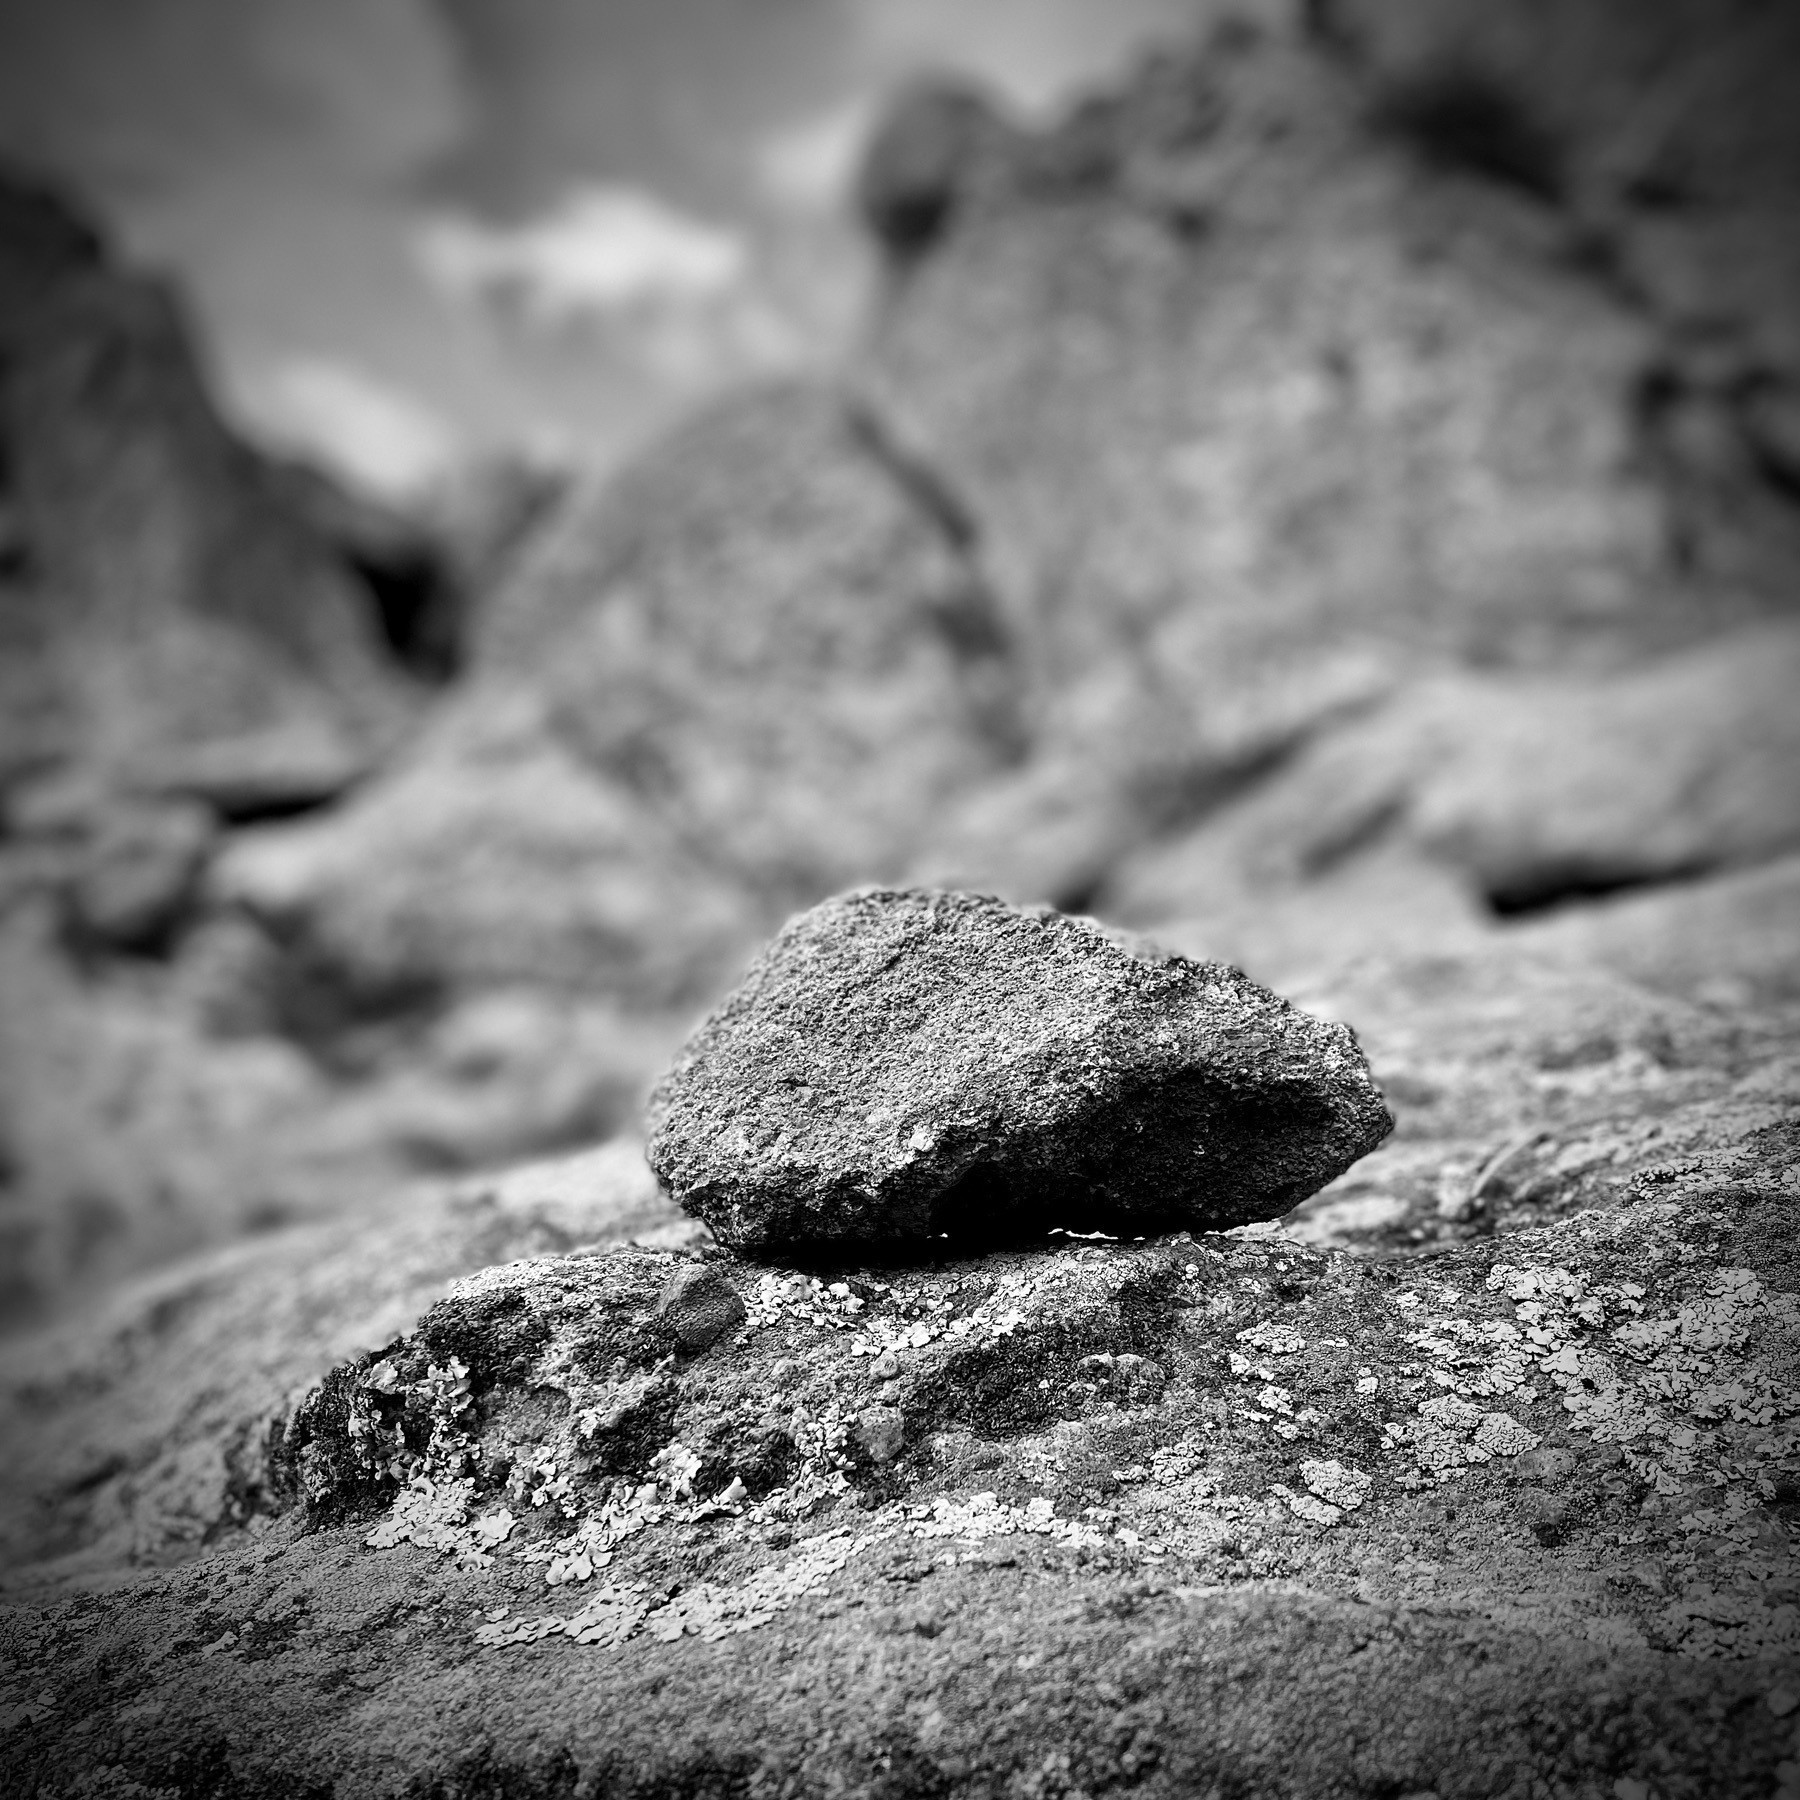 Stone atop boulders, black and white.